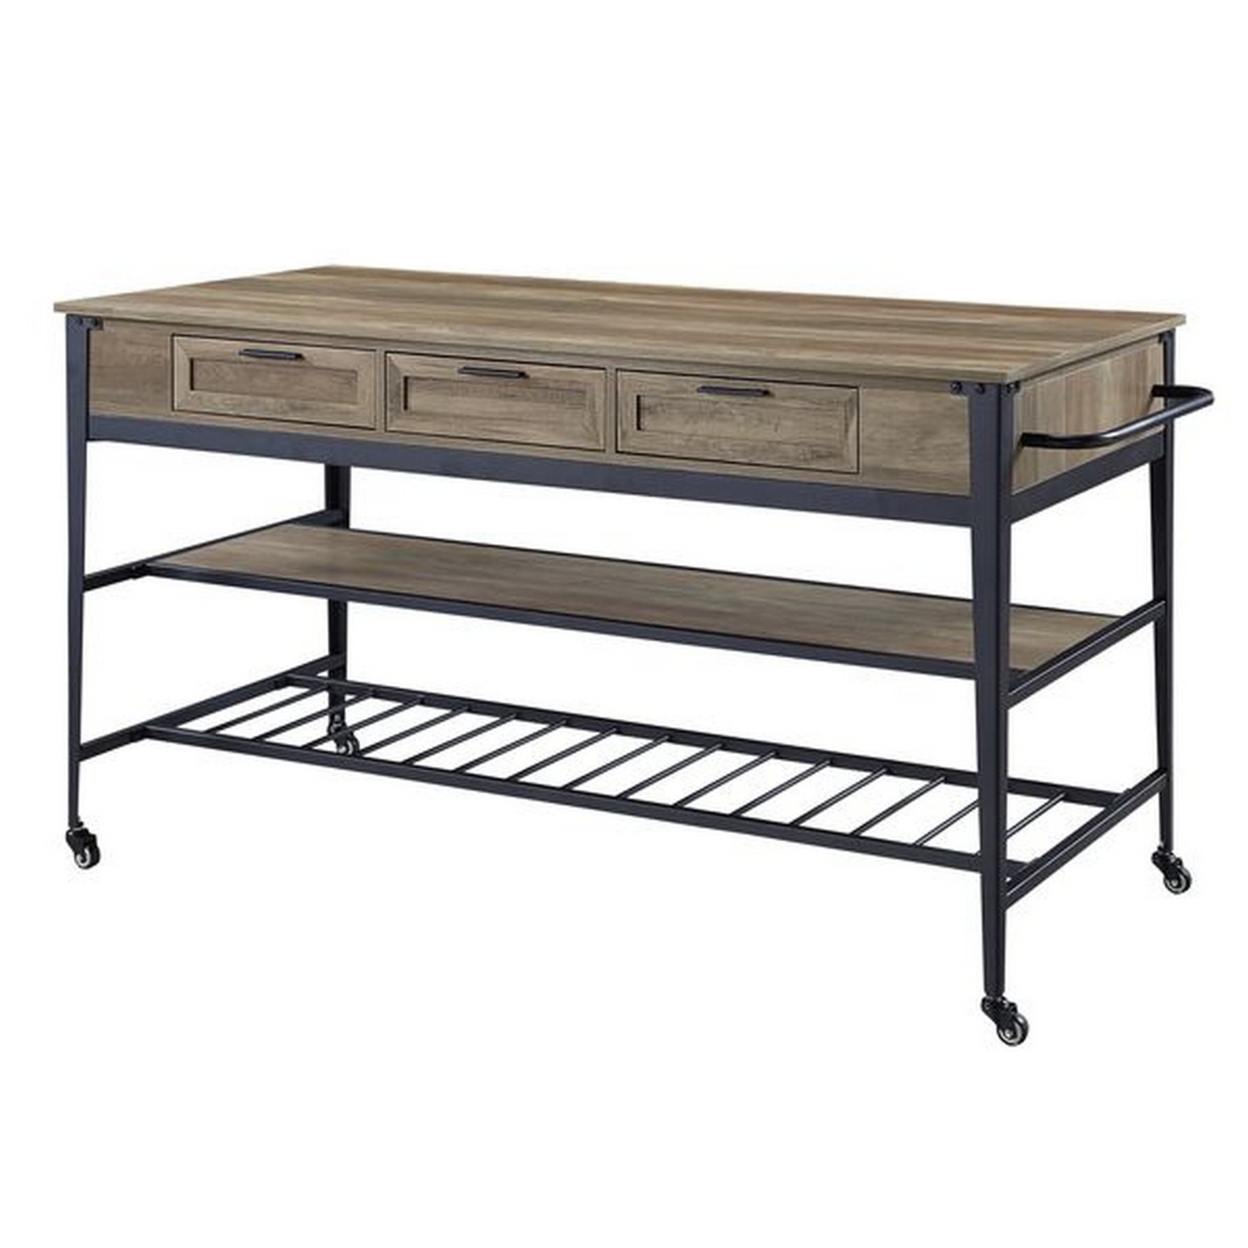 3 Tier Kitchen Island With 3 Drawers And Lockable Caster Wheels, Brown And Black- Saltoro Sherpi